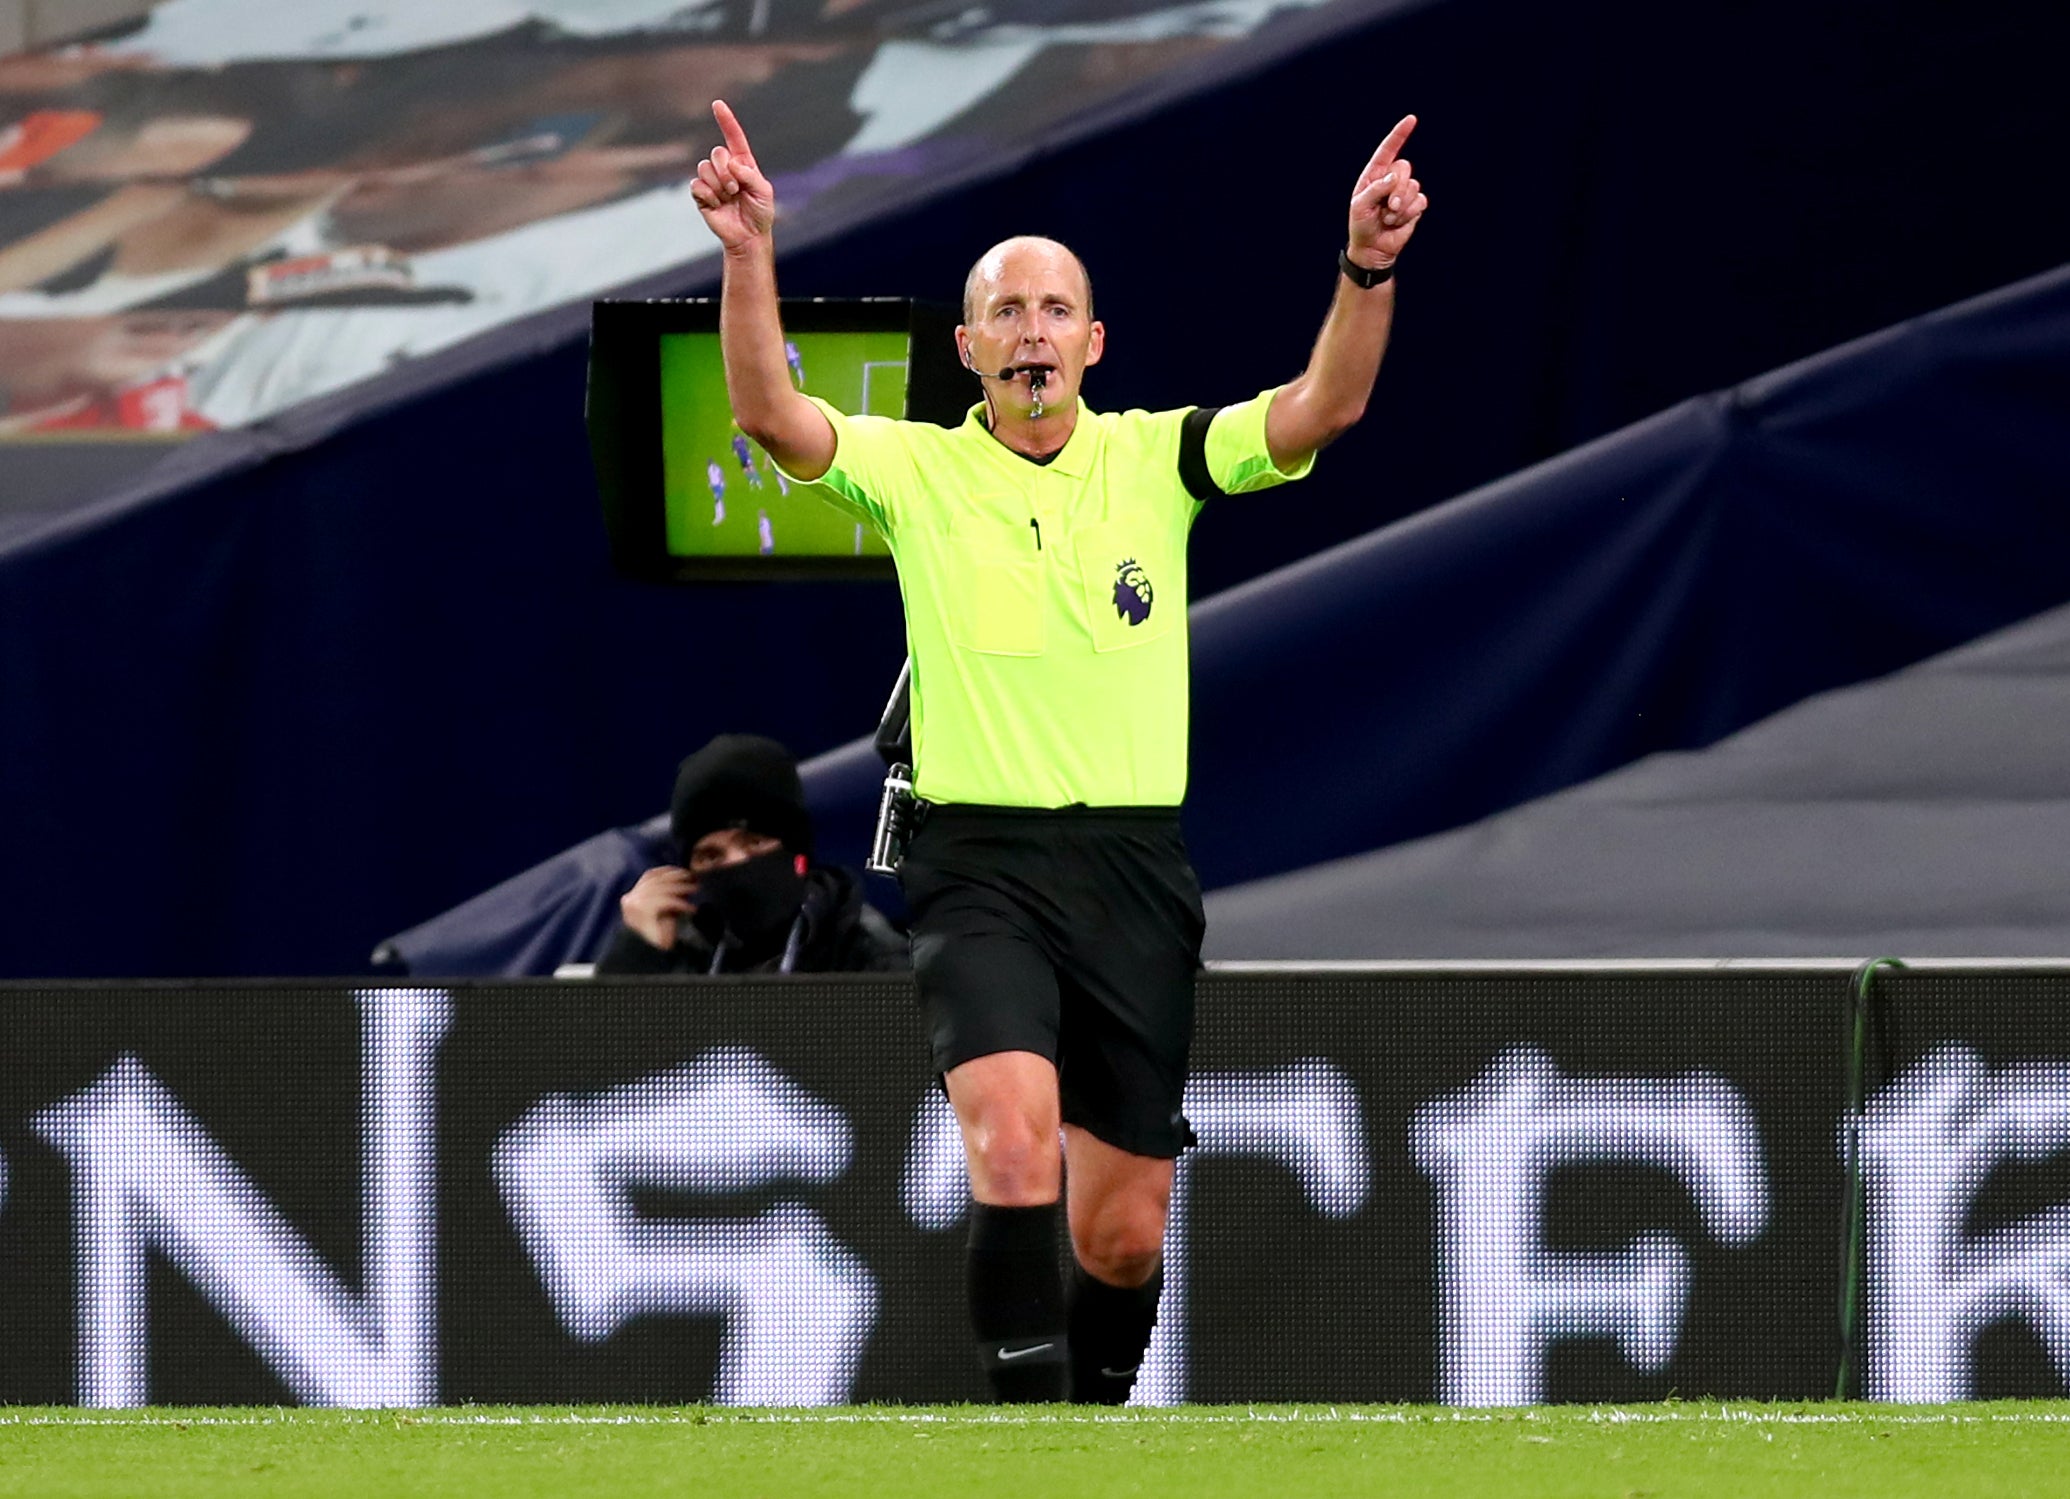 Mike Dean has been reported to be set for a VAR role after he retires as a referee (Clive Rose/PA)